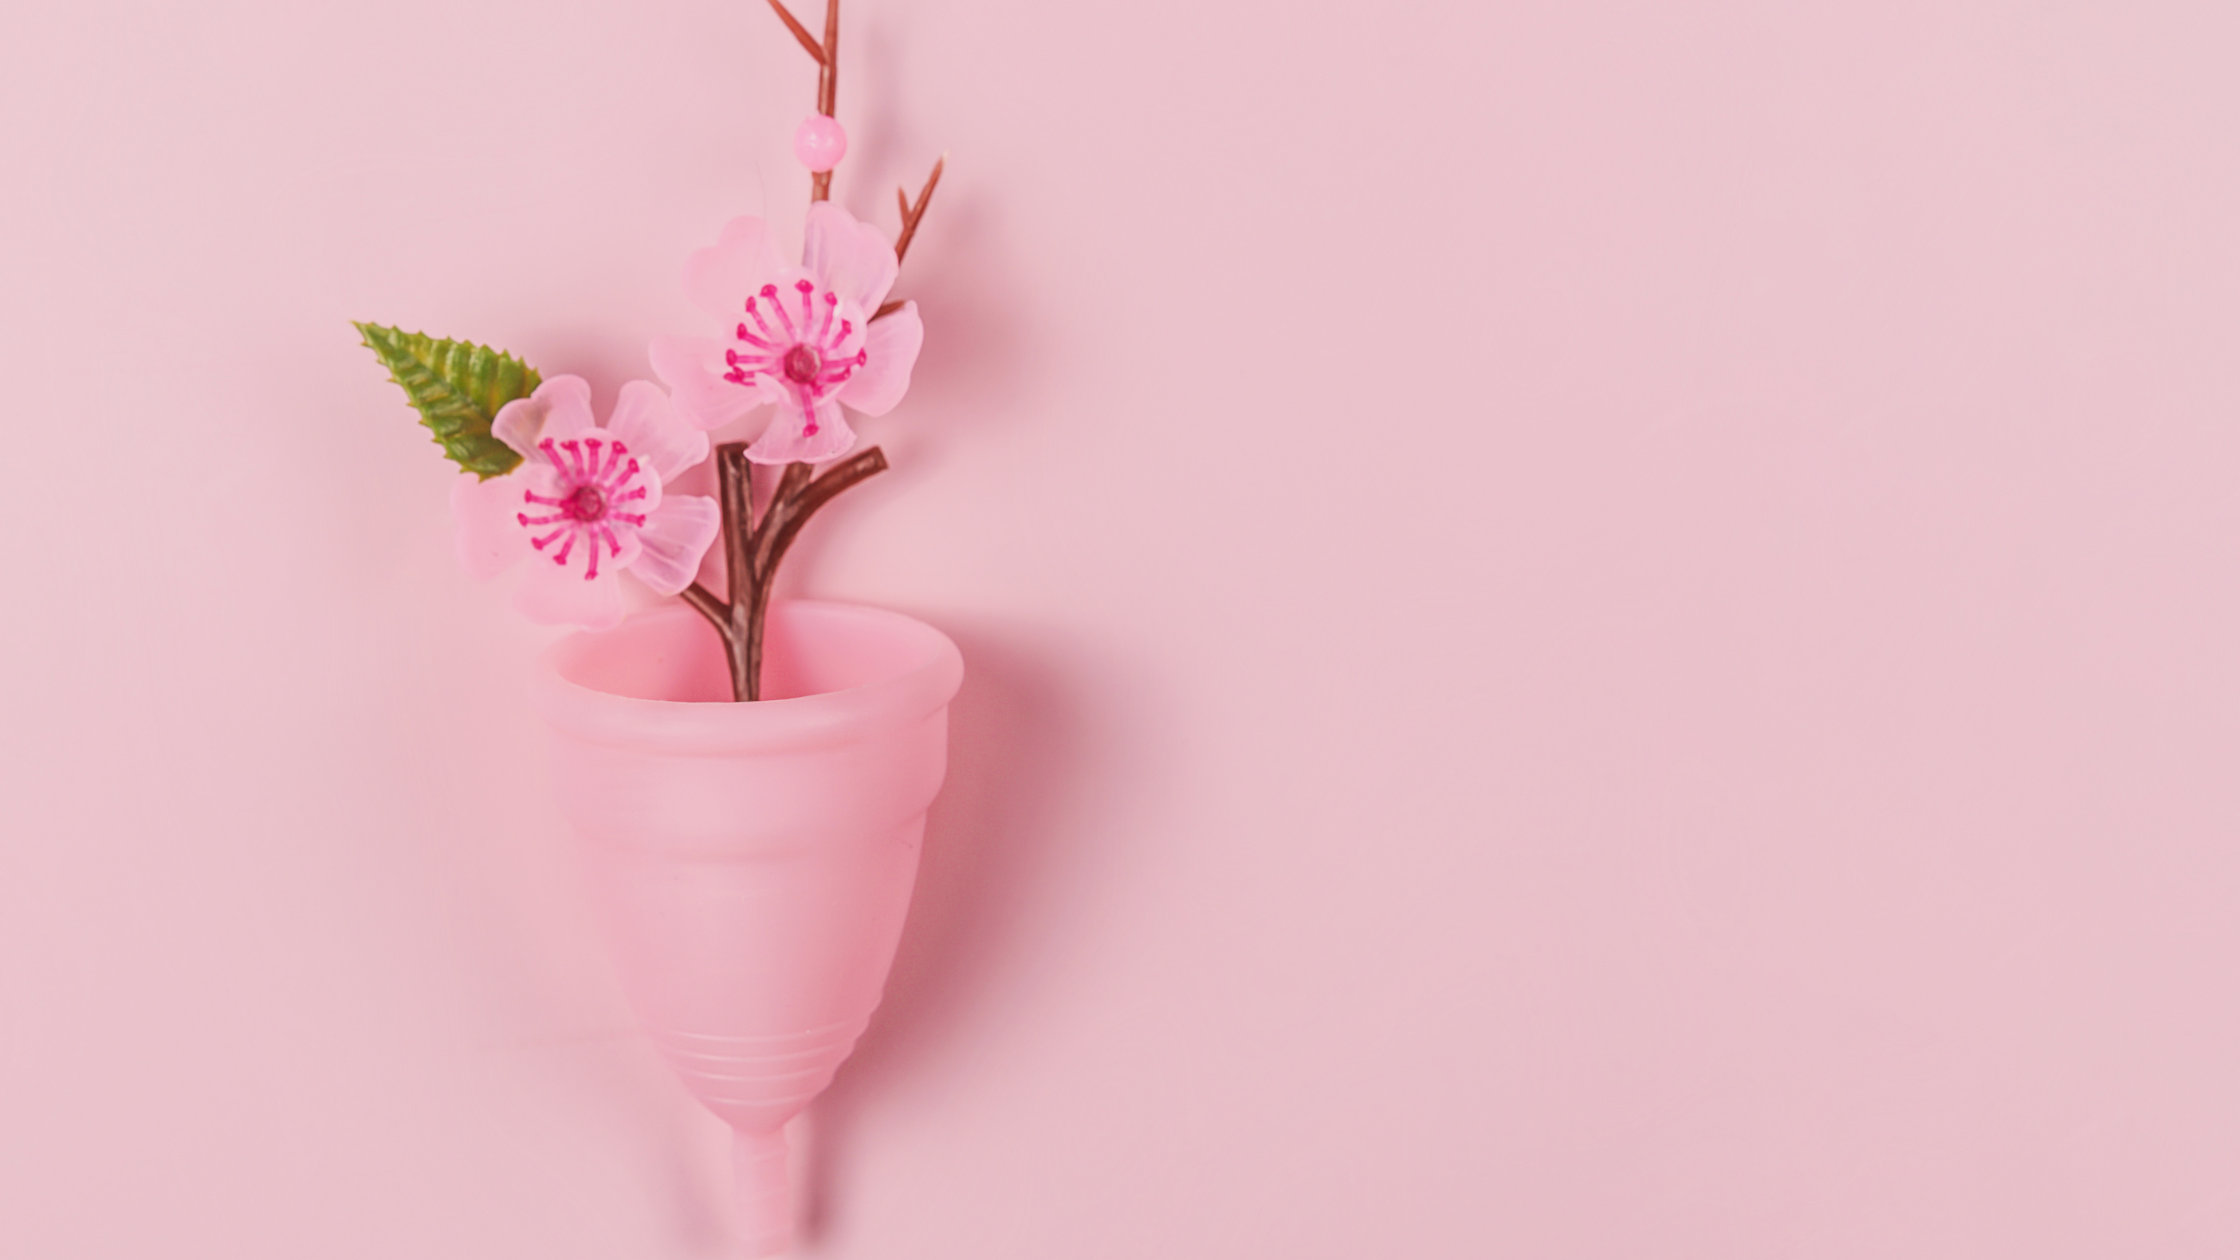 Why should you choose a Menstrual cup?